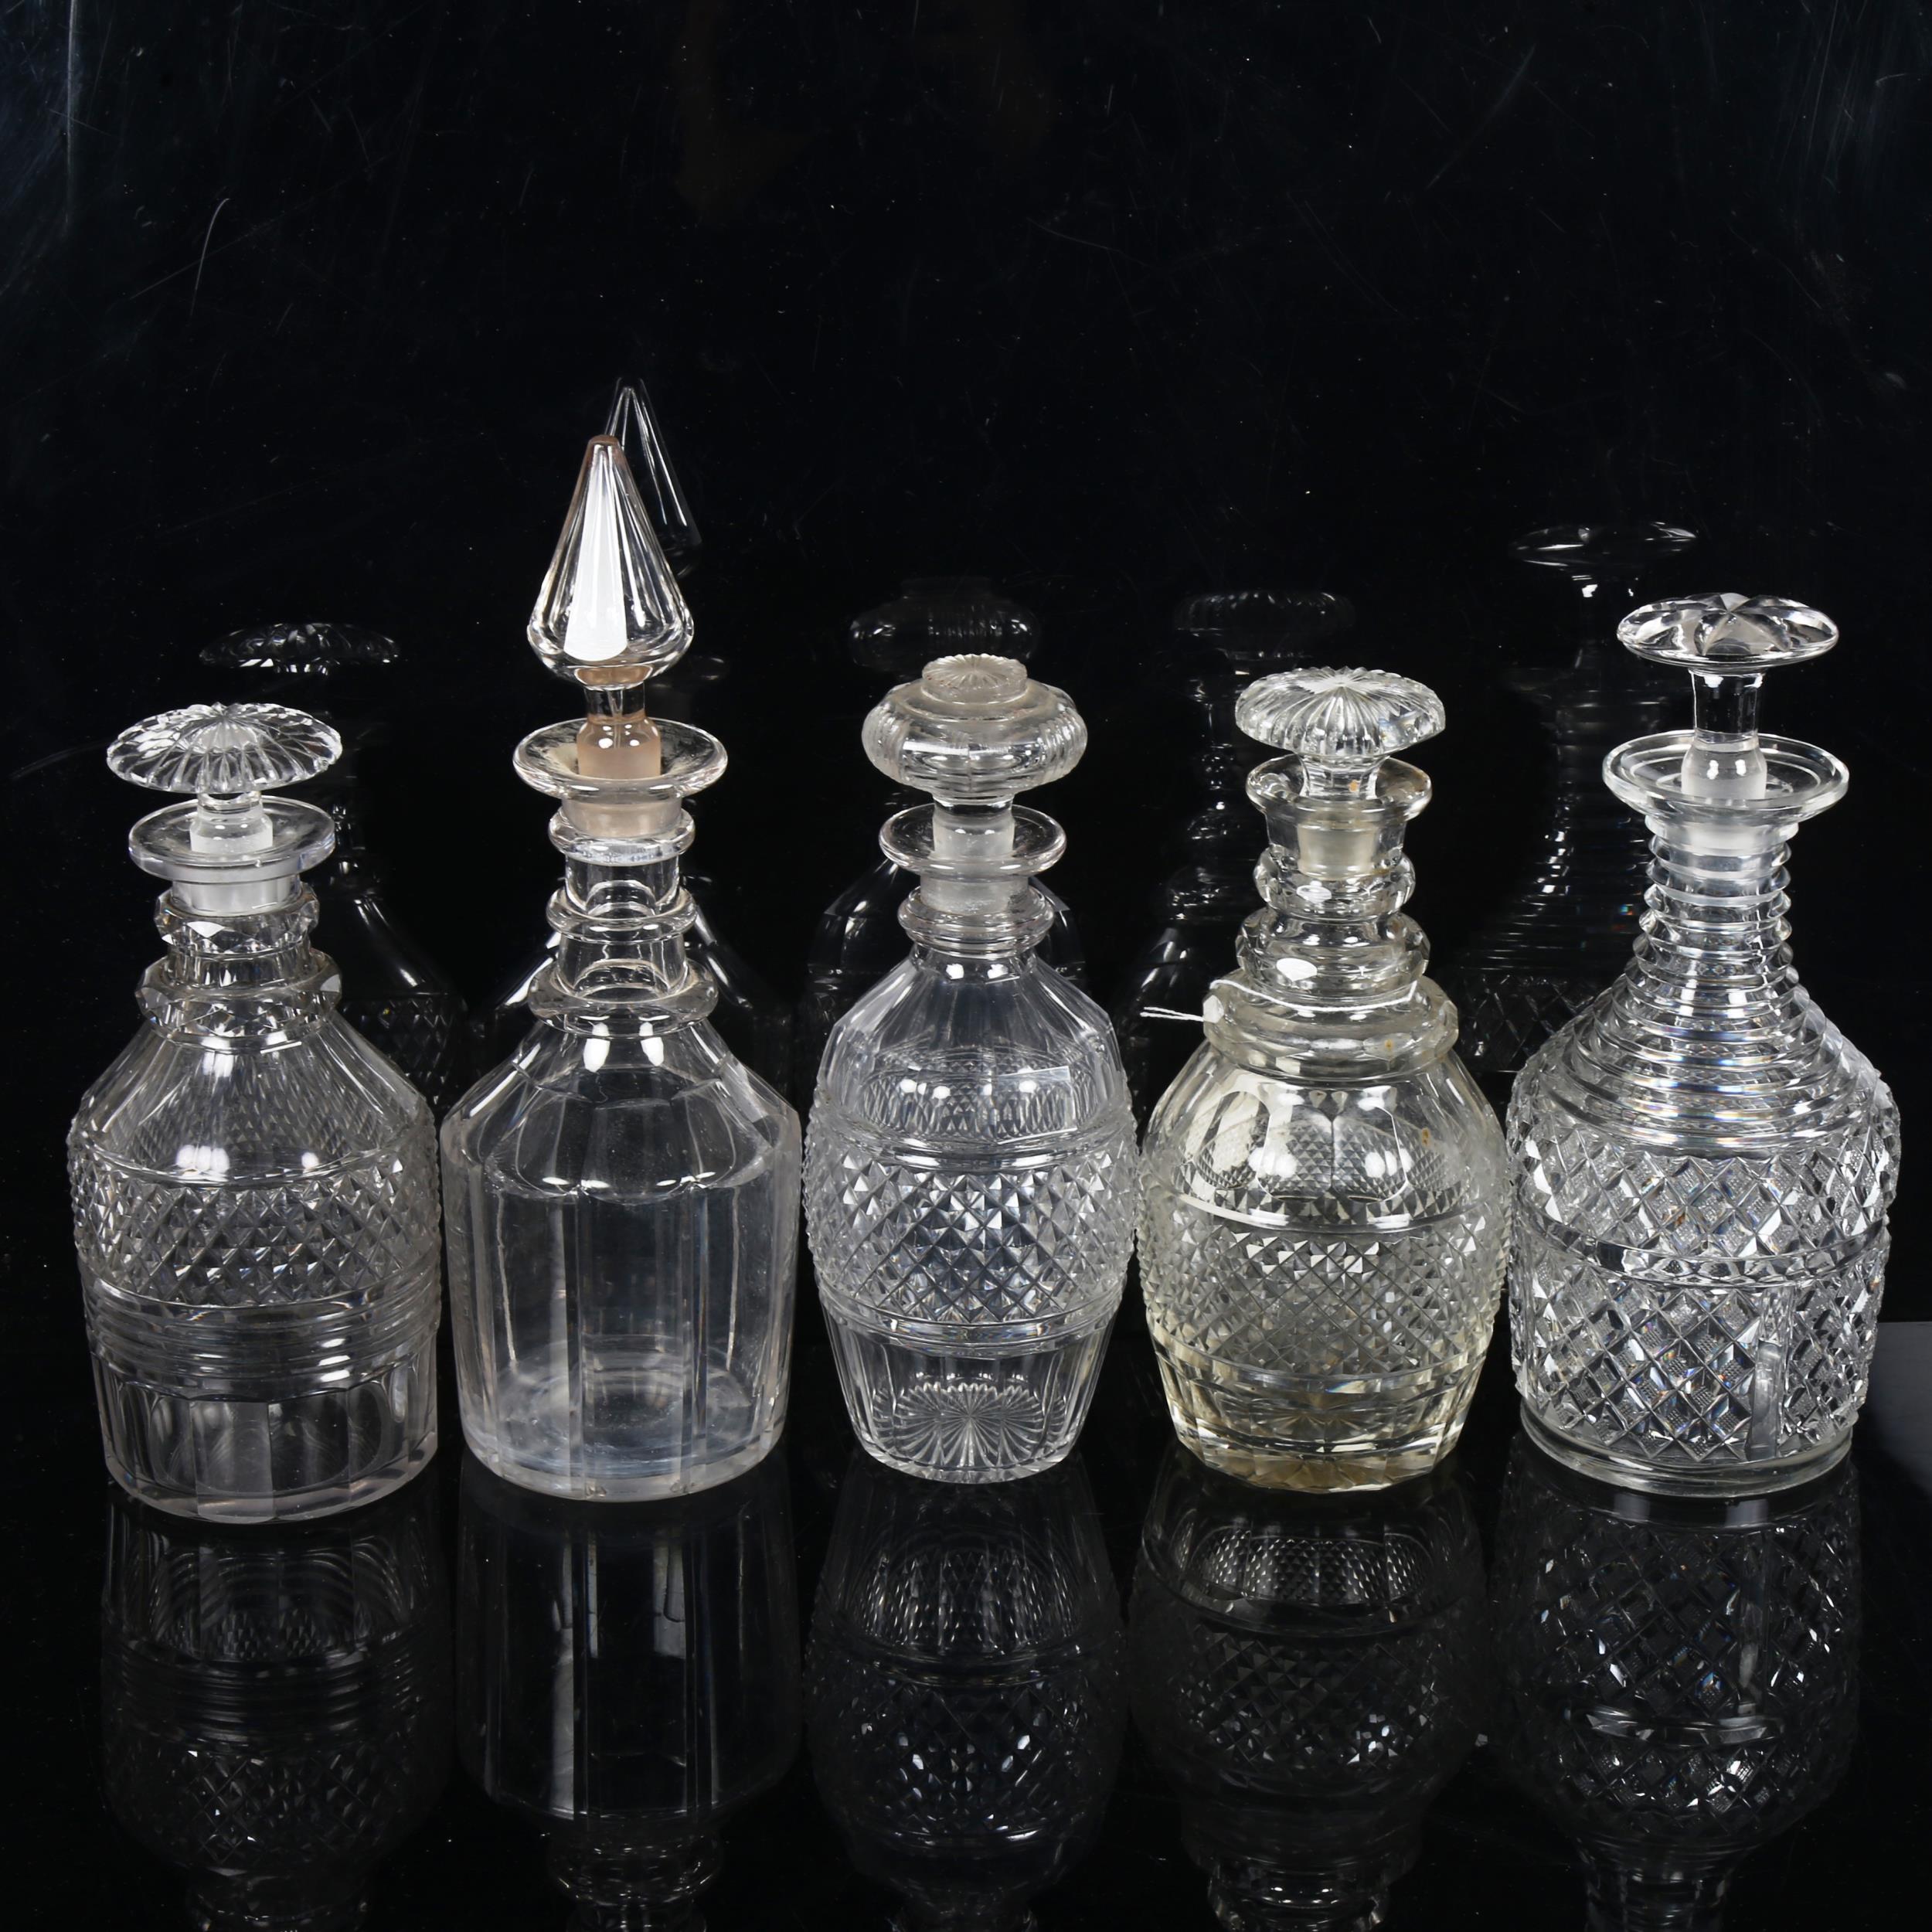 5 Antique cut-glass decanters and stoppers, tallest 28cm